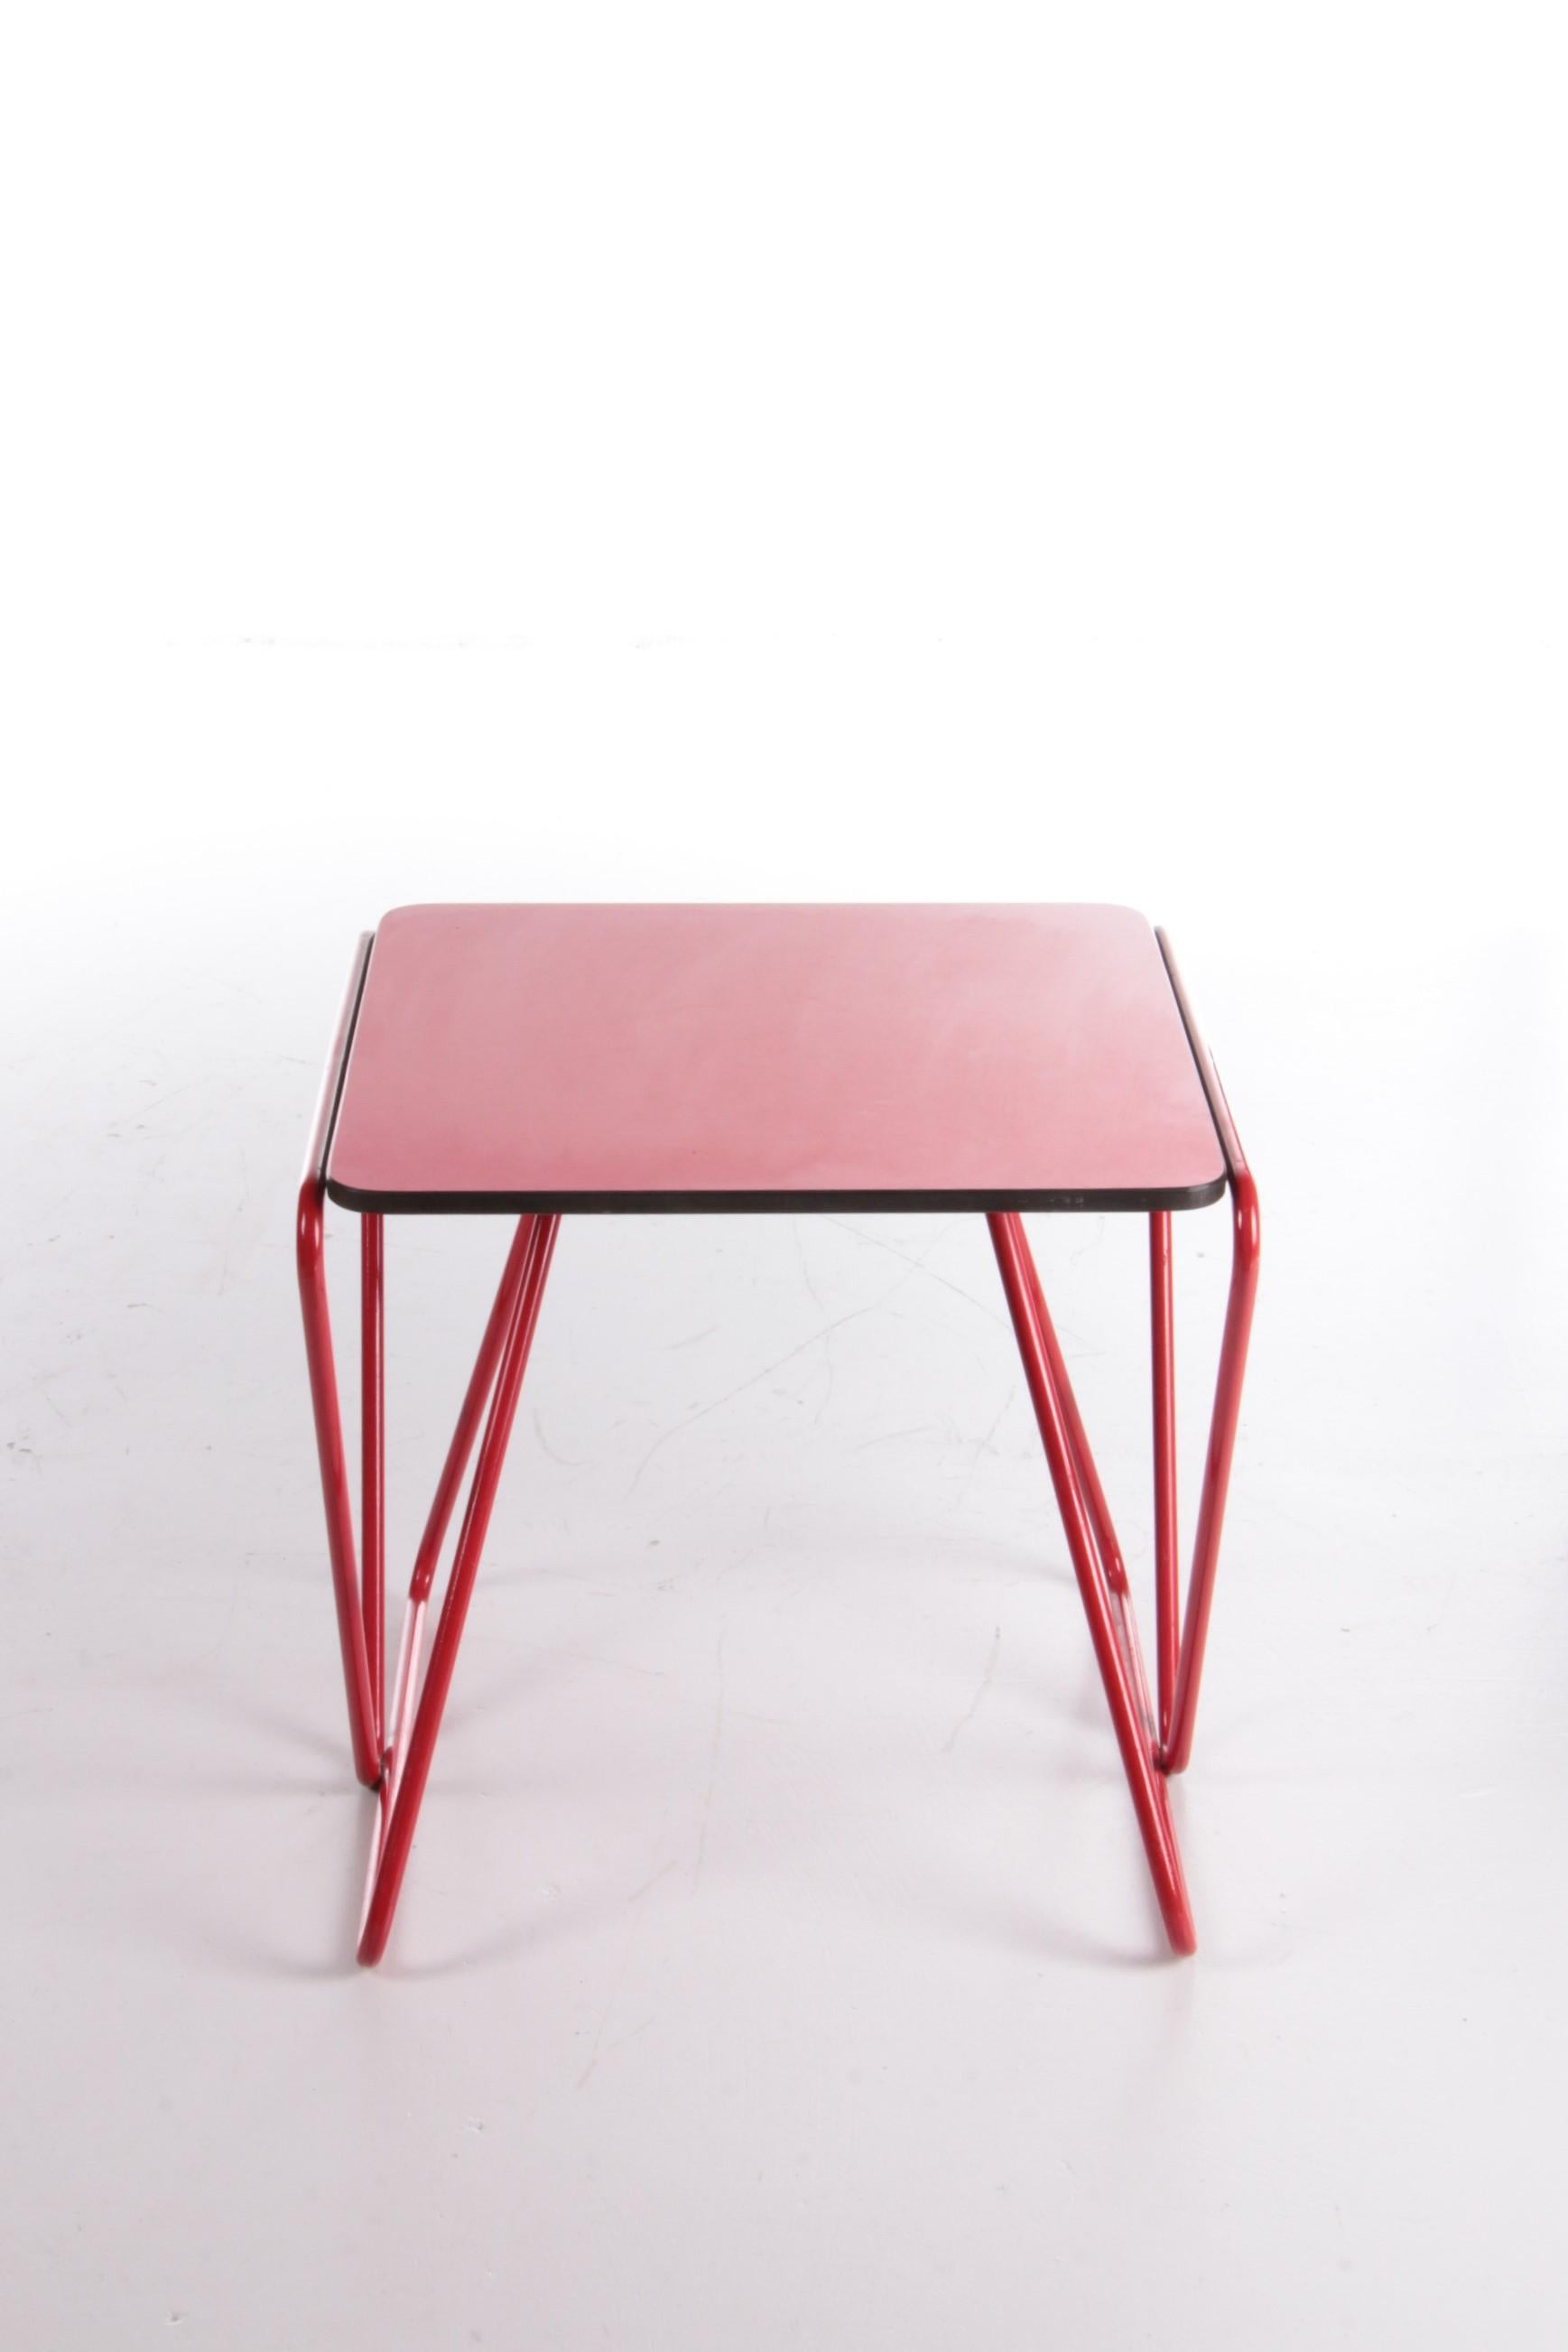 Metal Rare Side Table Designed by Walter Antonis for I-Form, Holland, 1978 For Sale